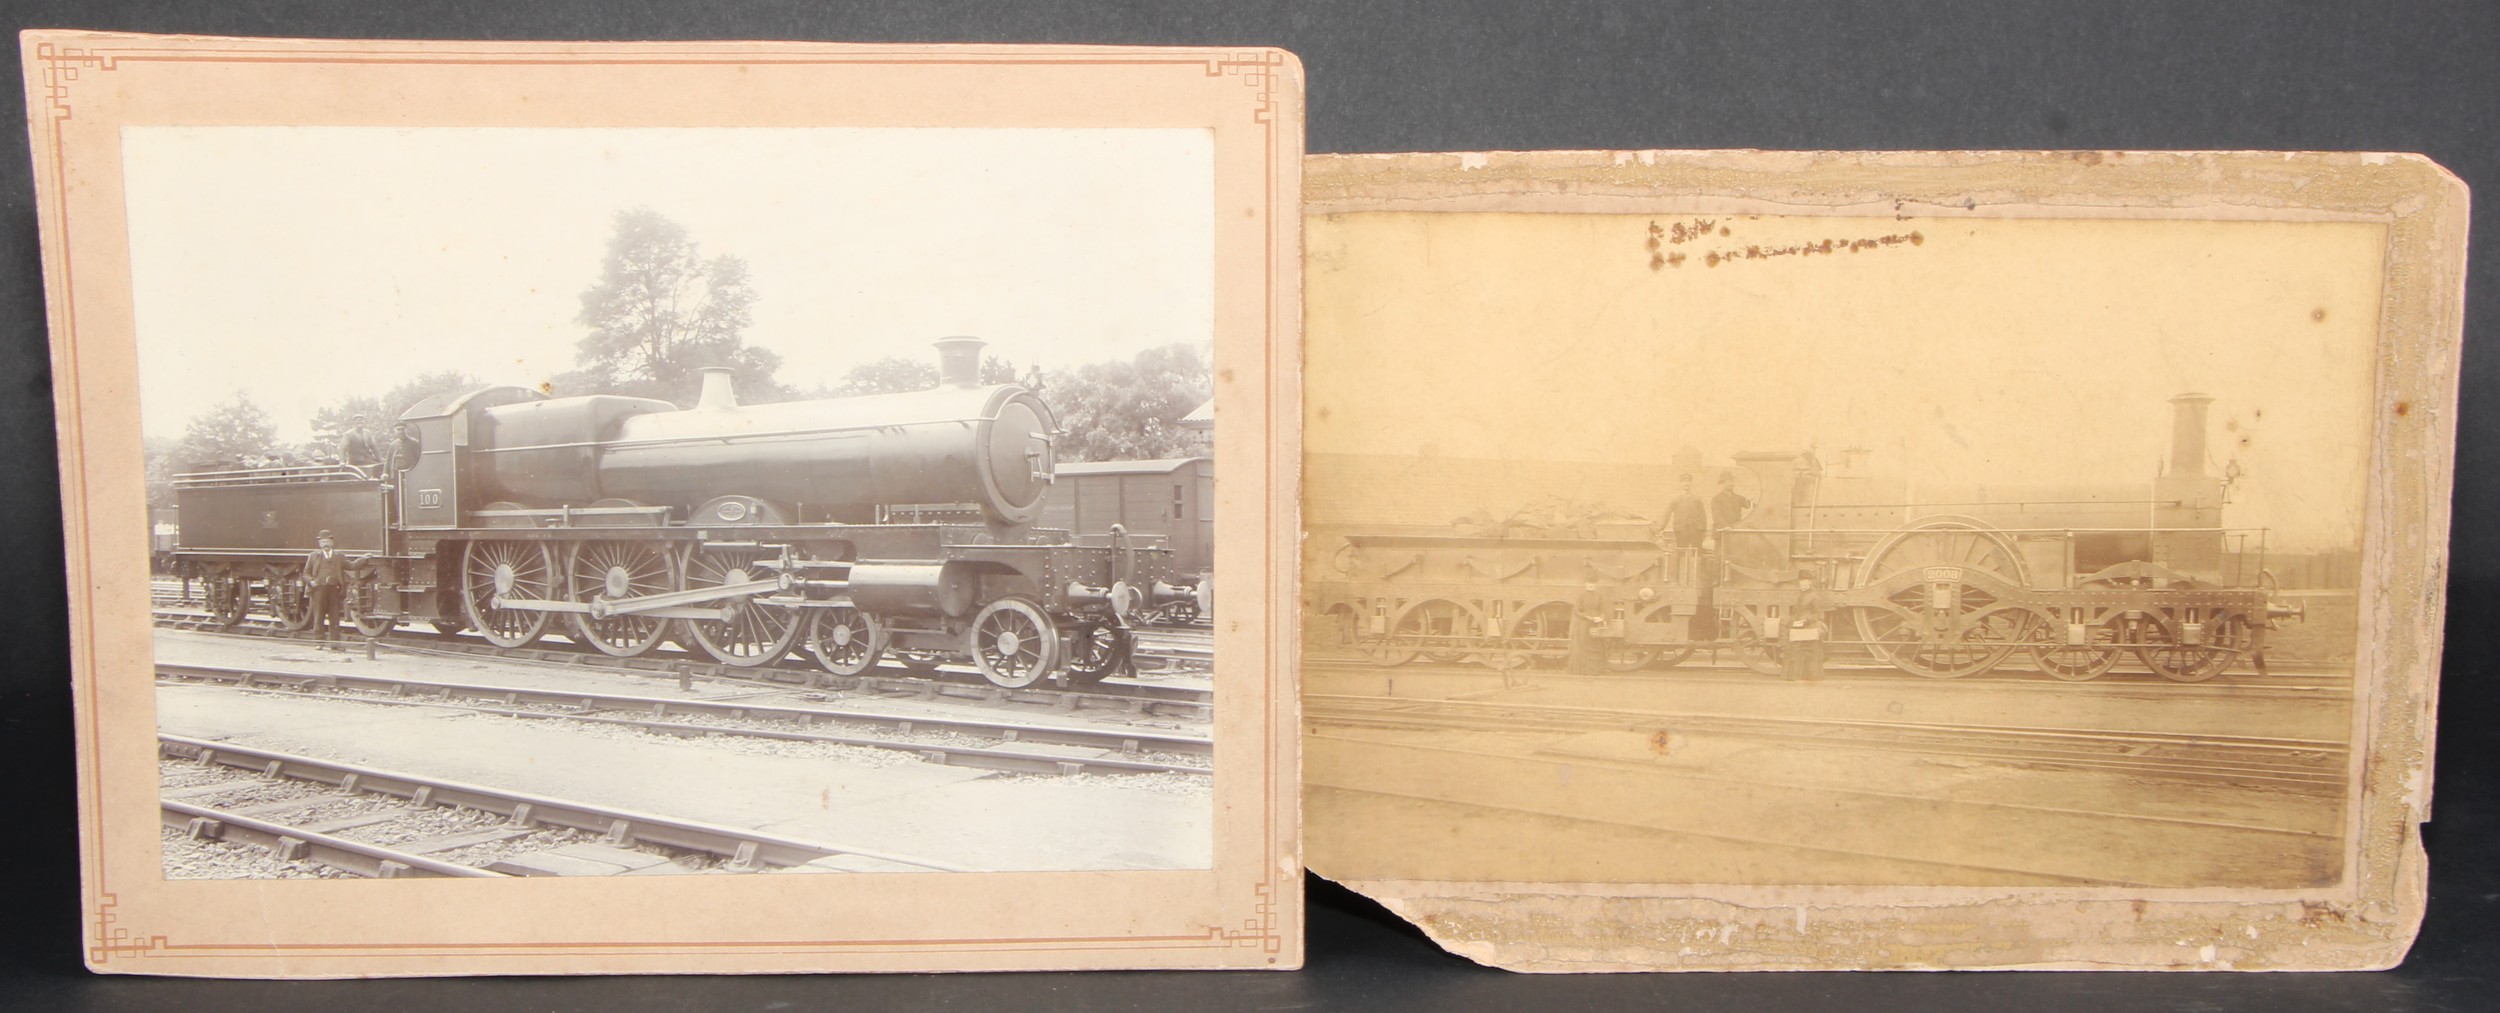 Photography - Railwayana - a collection of 19th century photographs of railway locomotives, many - Image 8 of 8